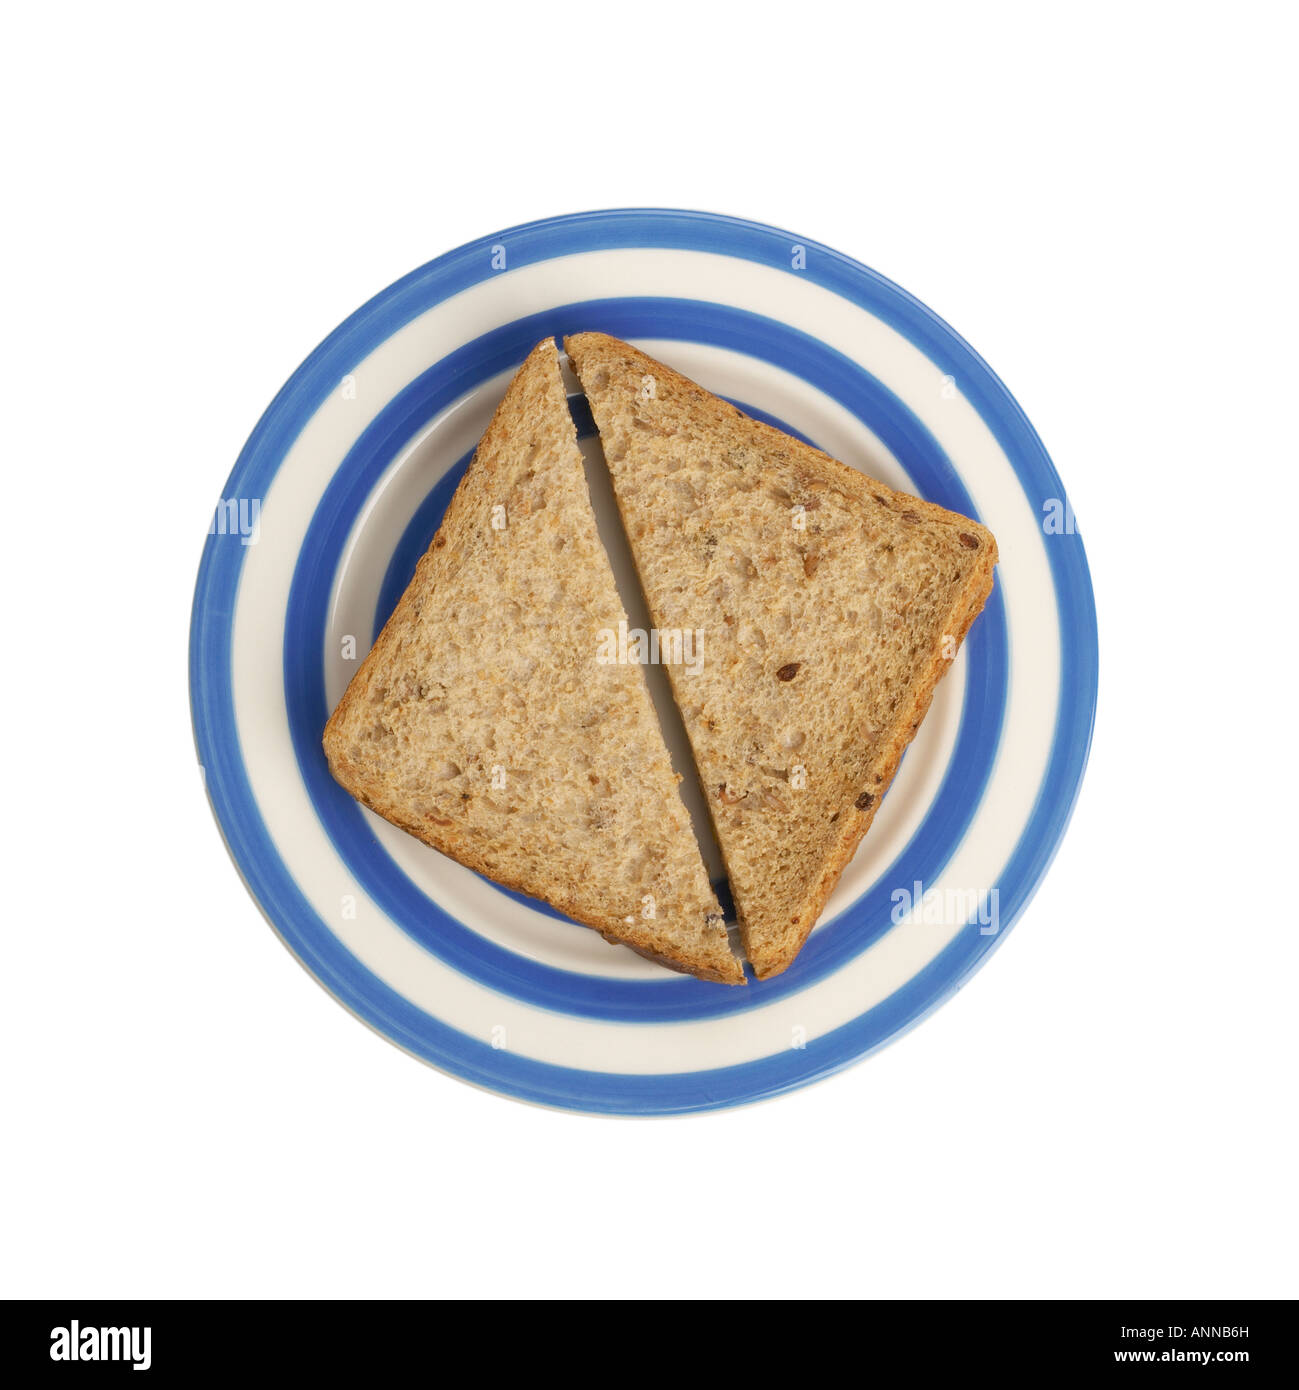 Wholemeal bread sandwich on plate Stock Photo